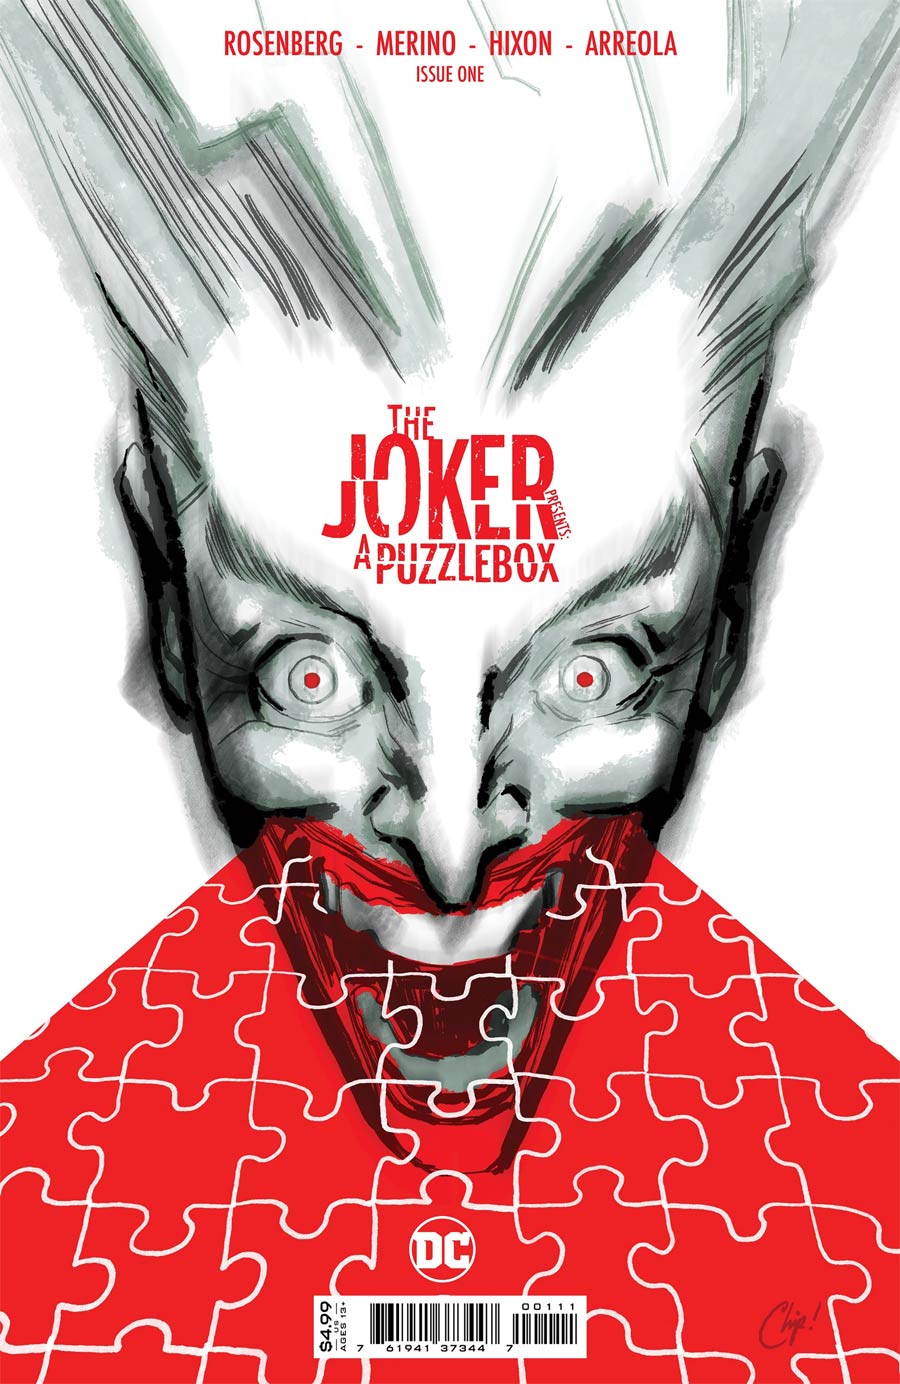 Joker Presents A Puzzlebox #1 Cover E DF Signed By Matthew Rosenberg